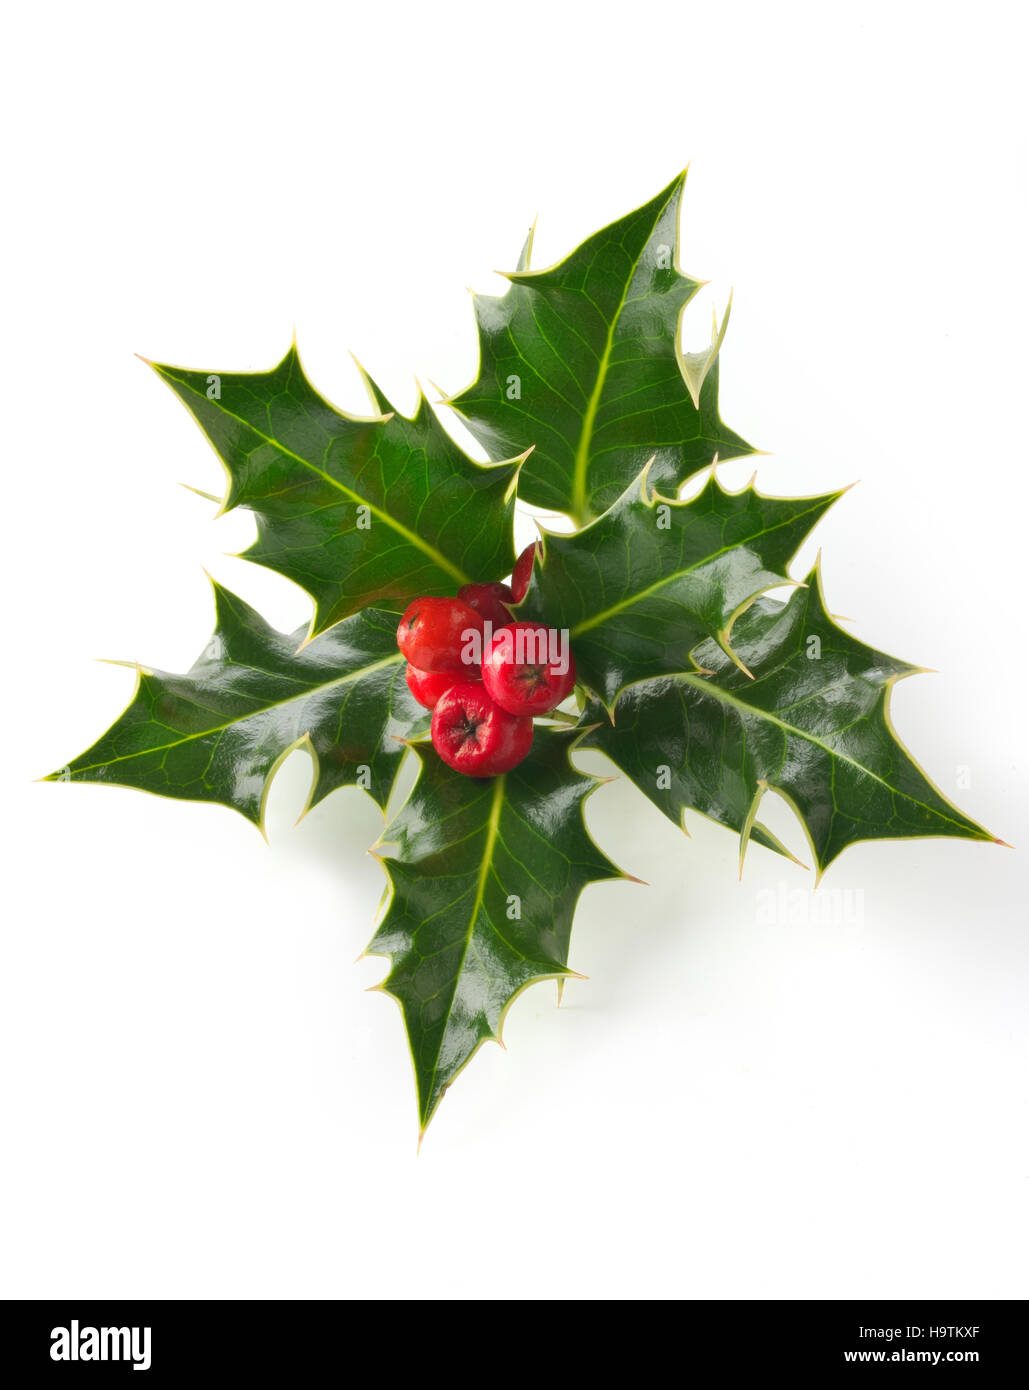 Holly leaves (Ilex), Christmas decoration with red berries against a white background Stock Photo